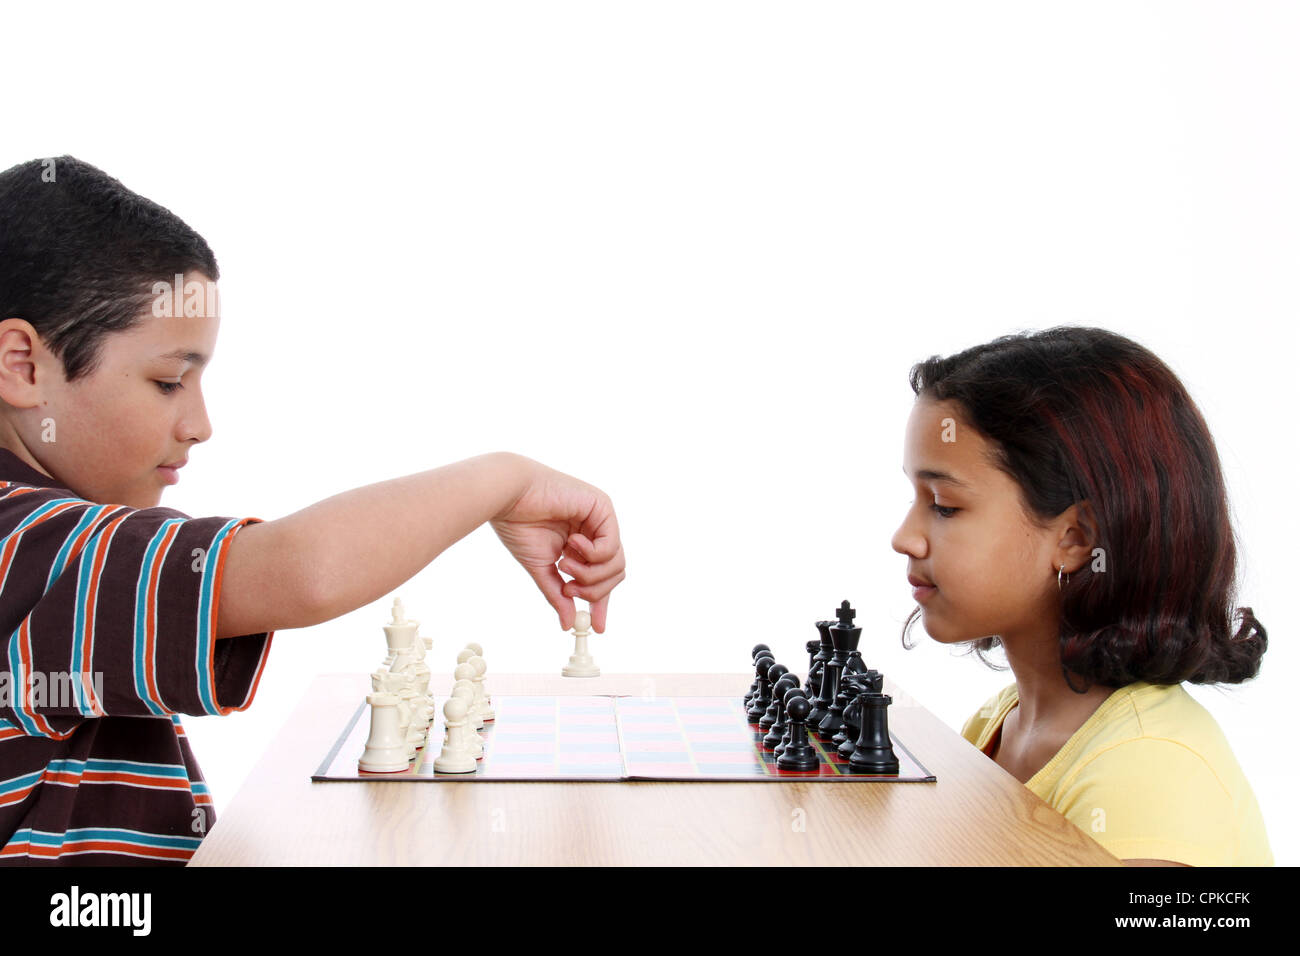 Picture of children playing chess set on white background Stock Photo